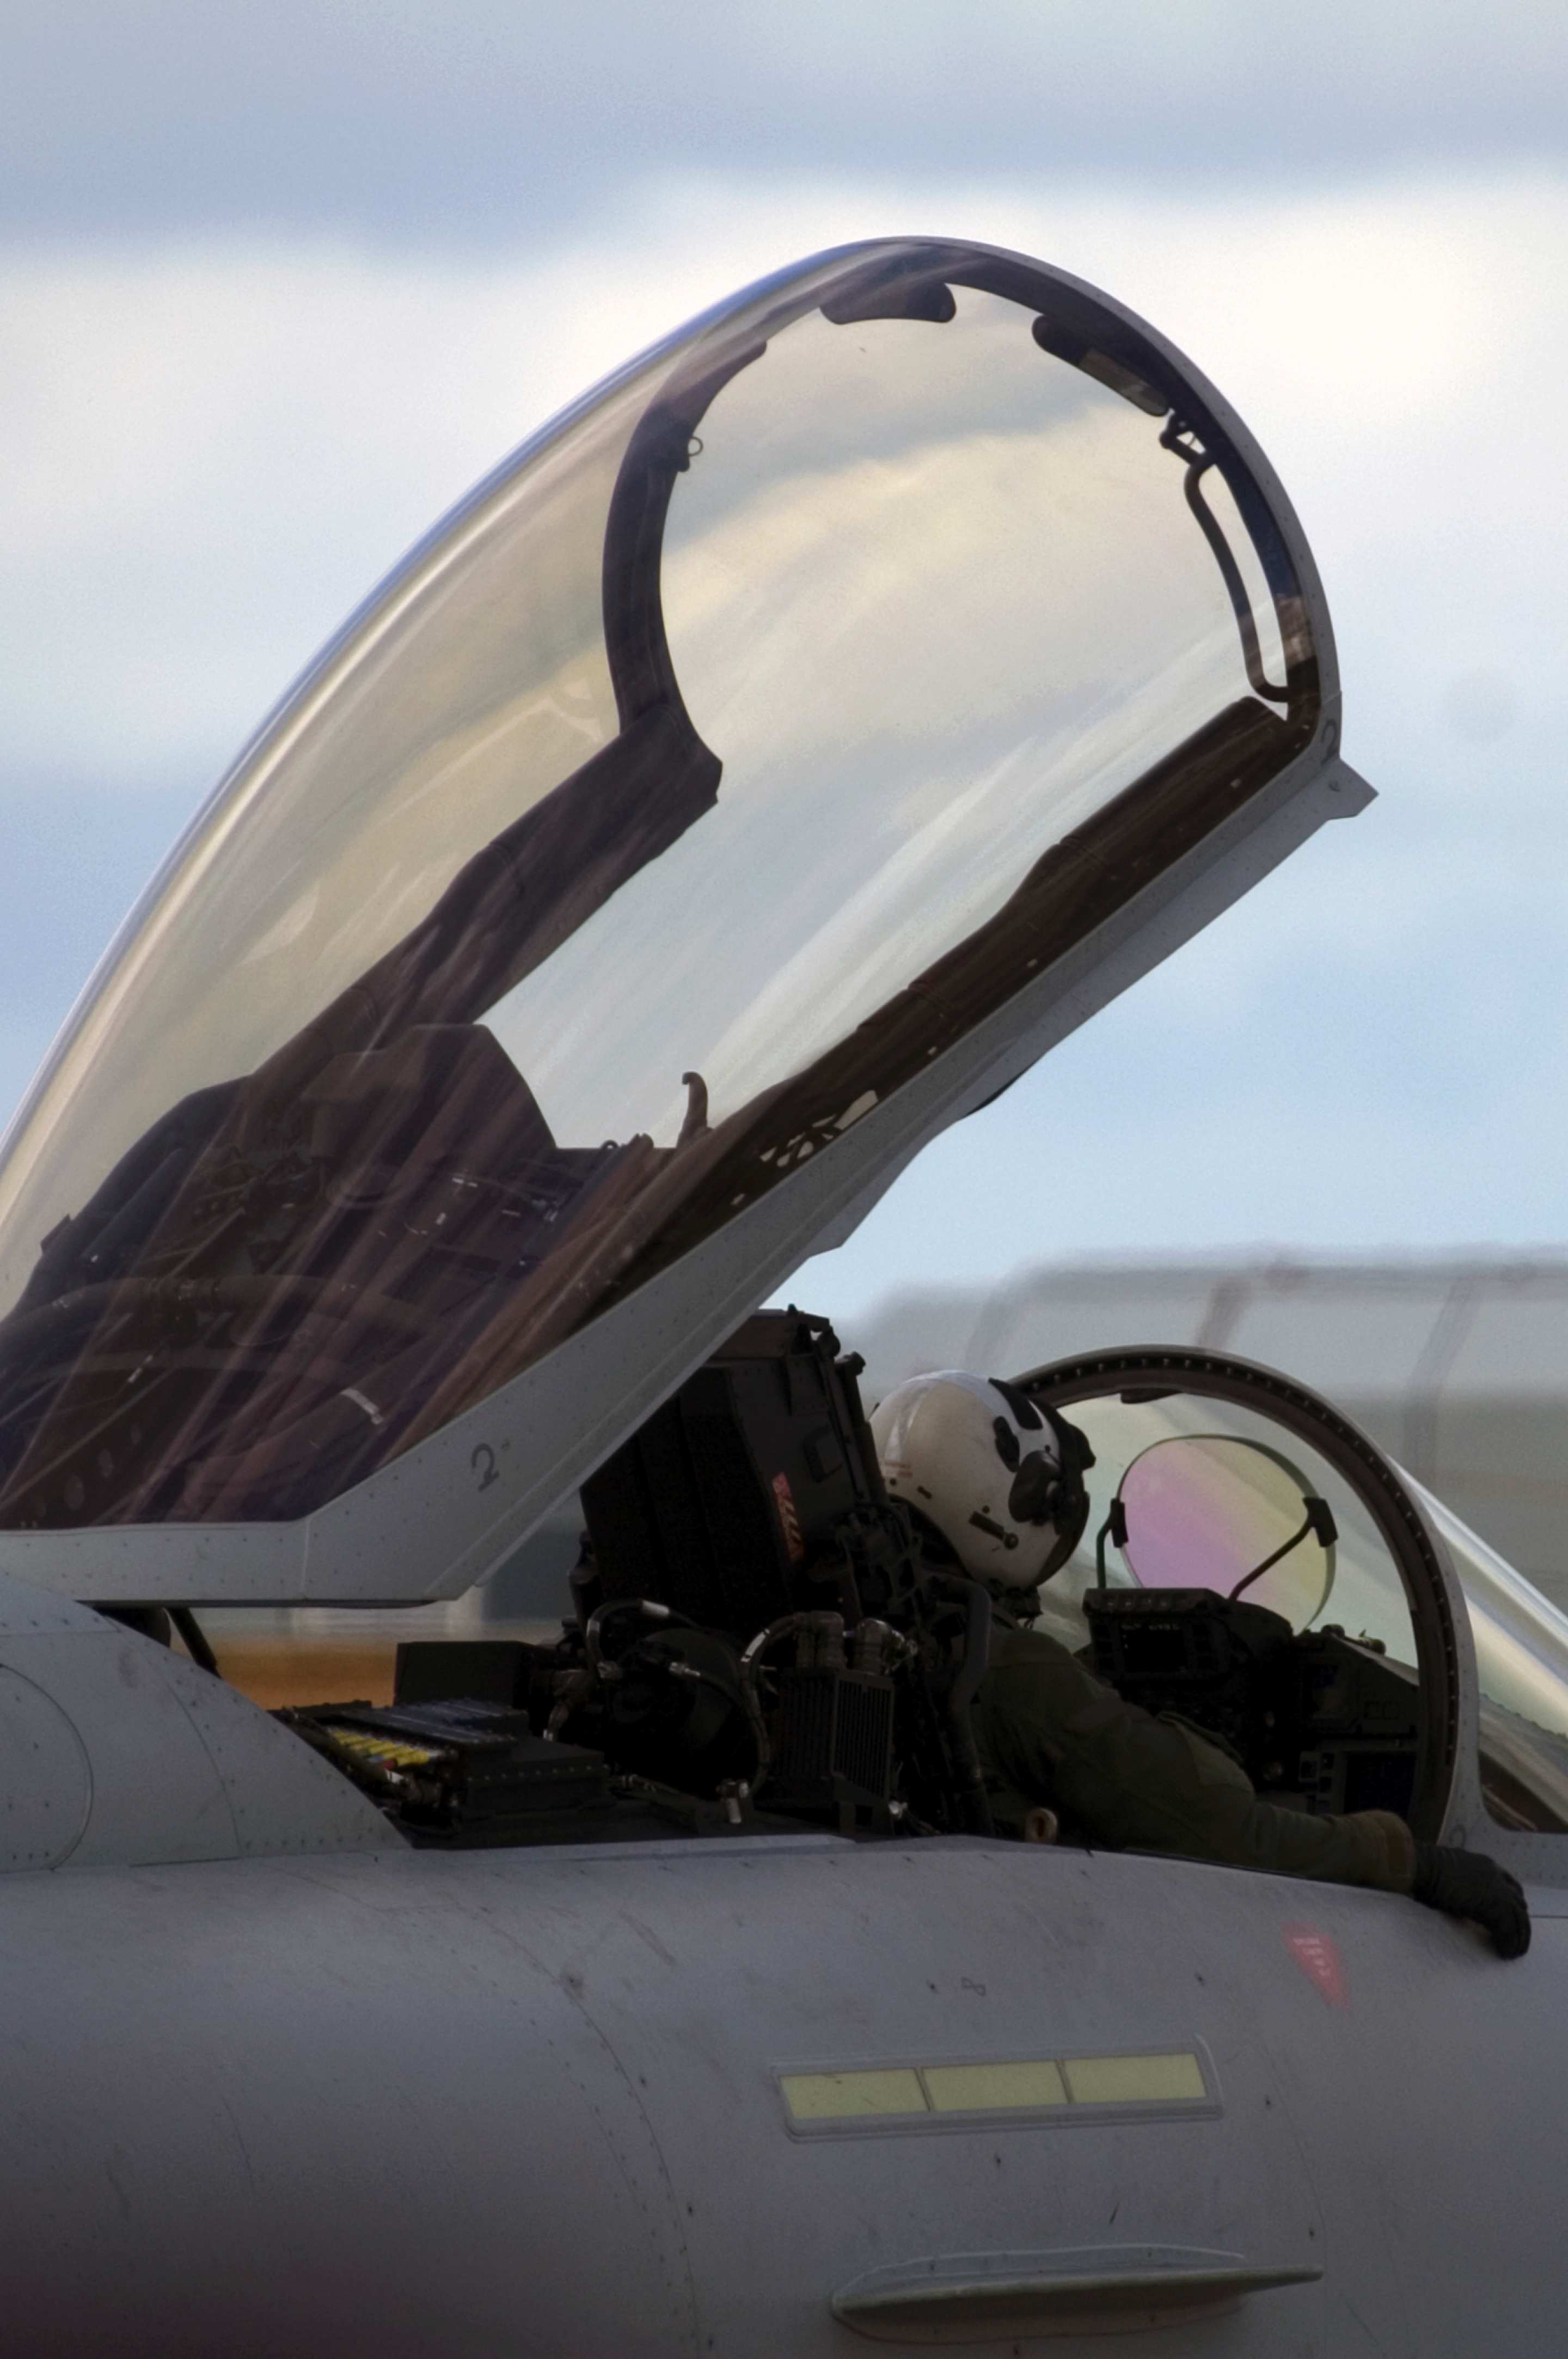 An airforce pilot sits grounded in a fighter jet with the cockpit window ajar. Image: iStock